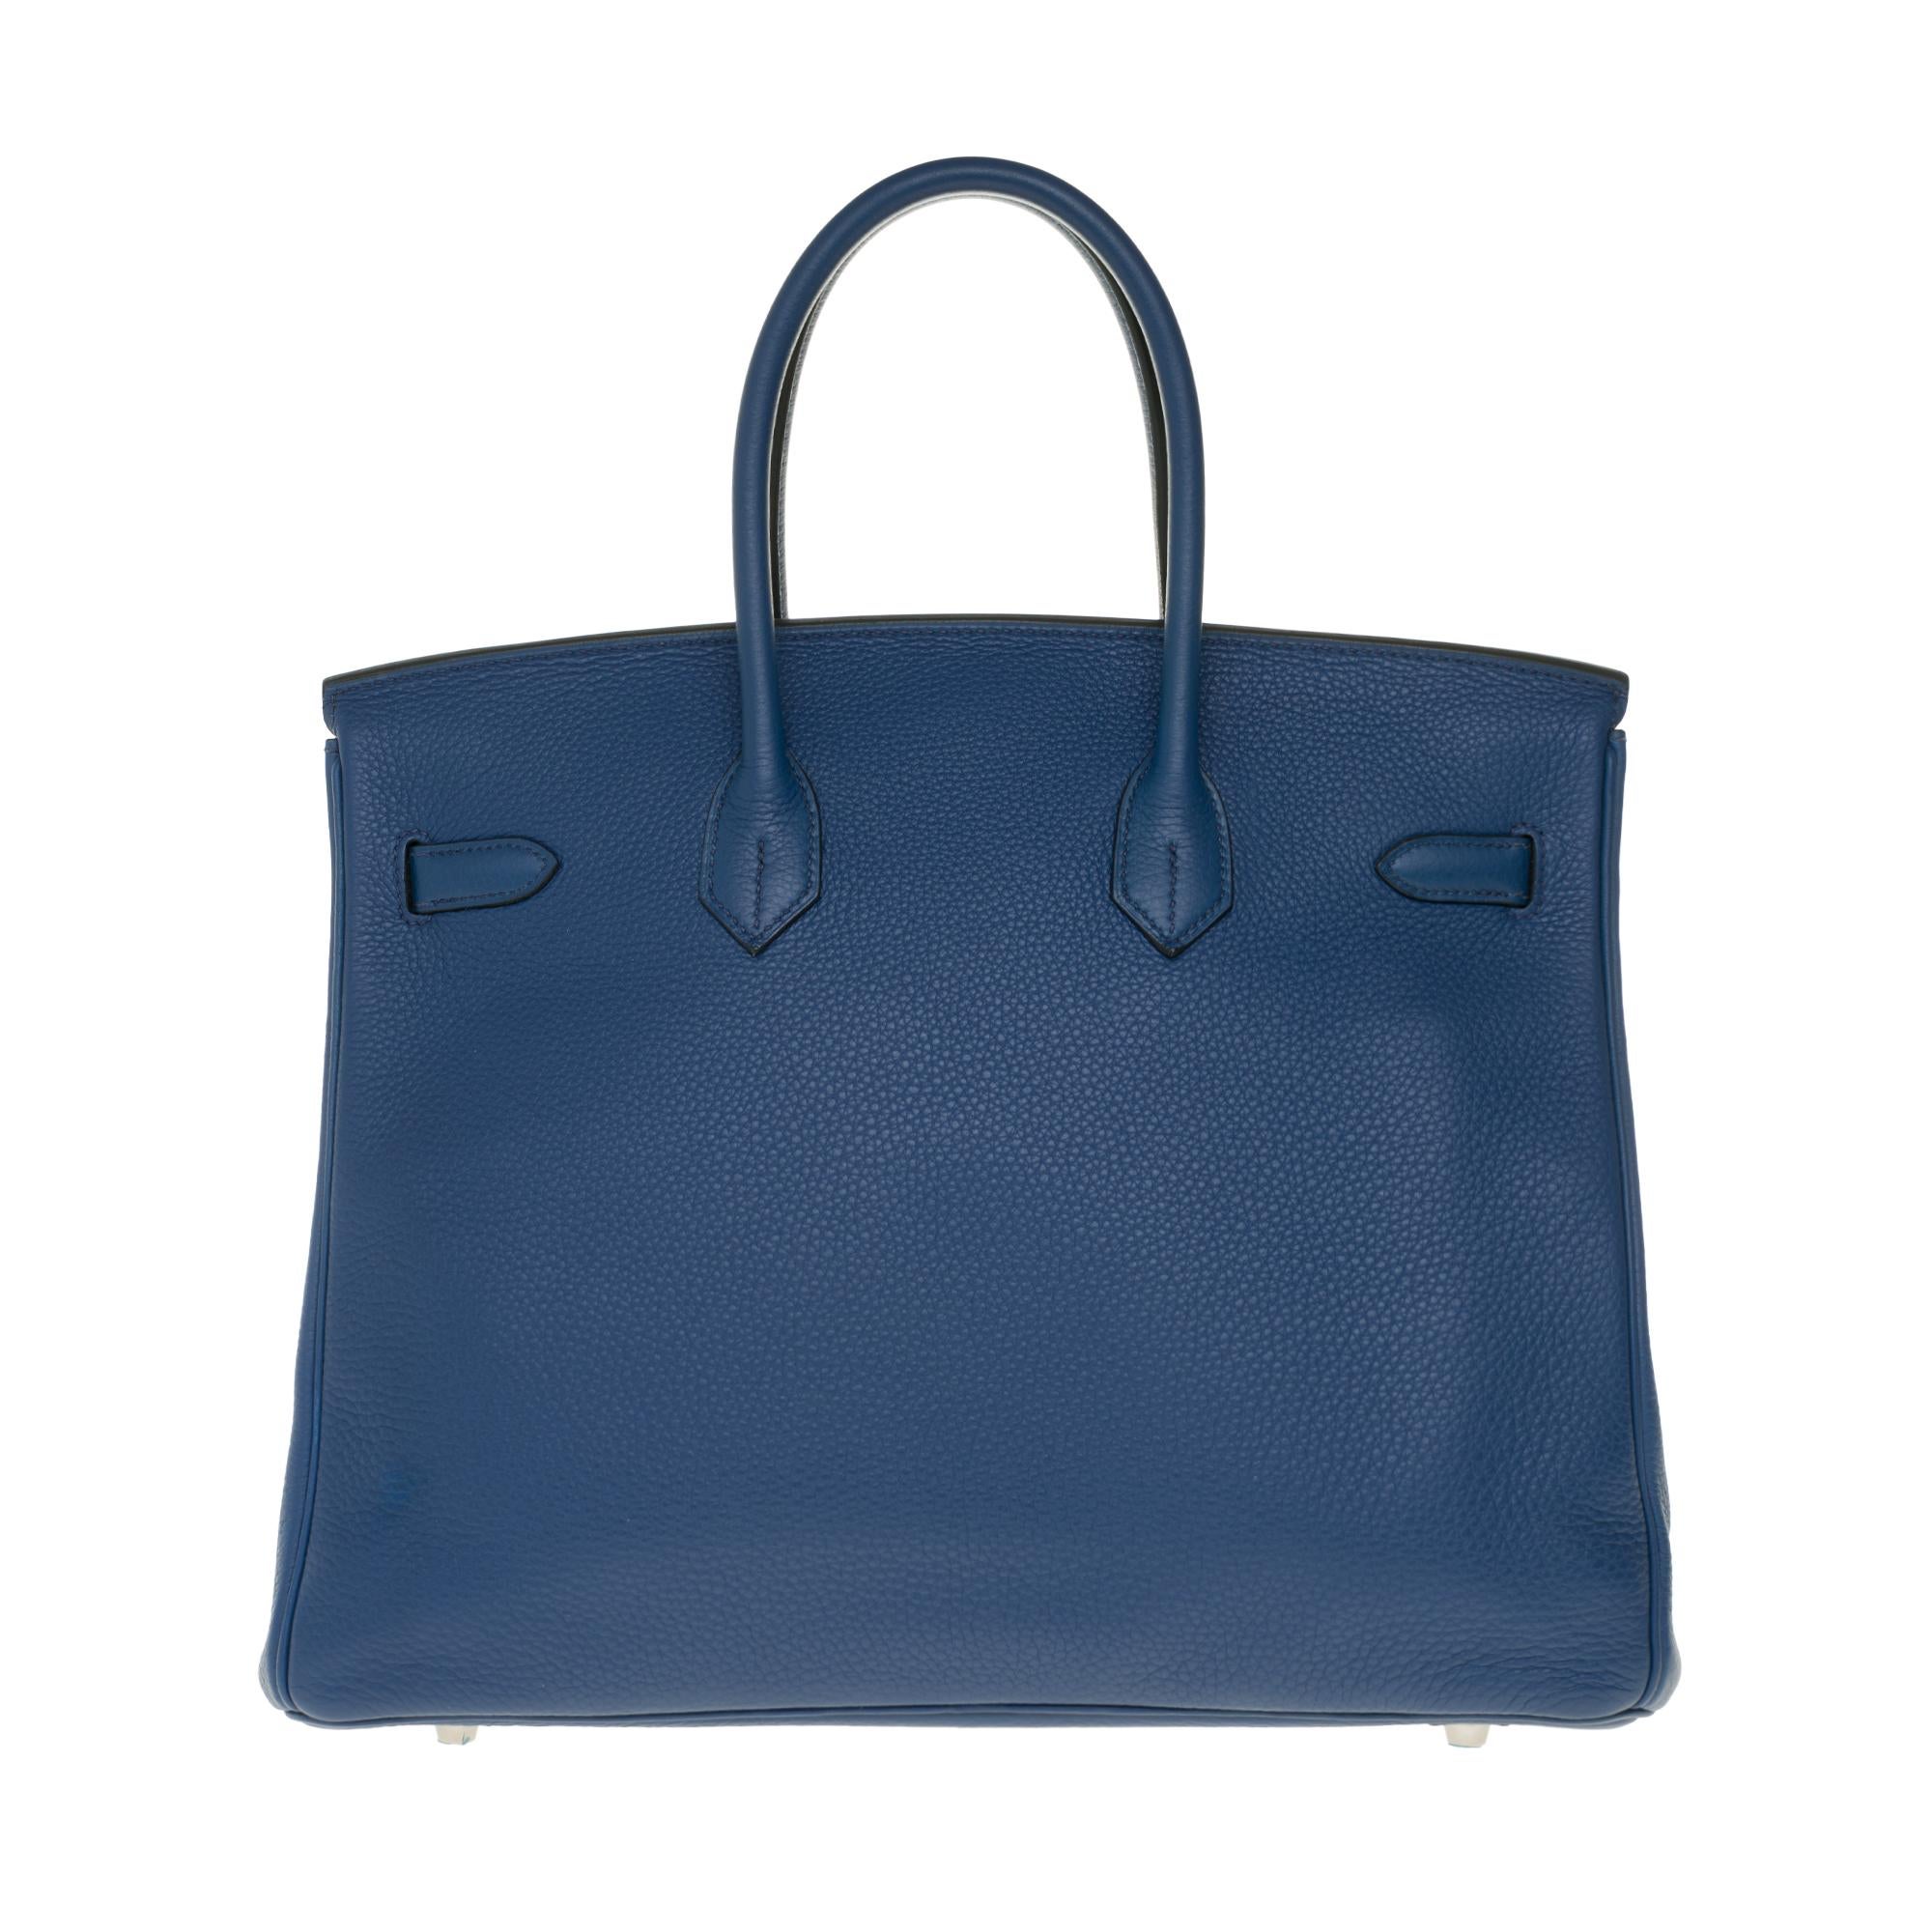 Beautiful Hermes Birkin 35 cm handbag in  blue Malta Togo leather  , palladium silver hardware , double handle in blue leather allowing a handheld.

Closure by flap.
Lining in blue leather, a zipped pocket, a patch pocket.
Signature: 